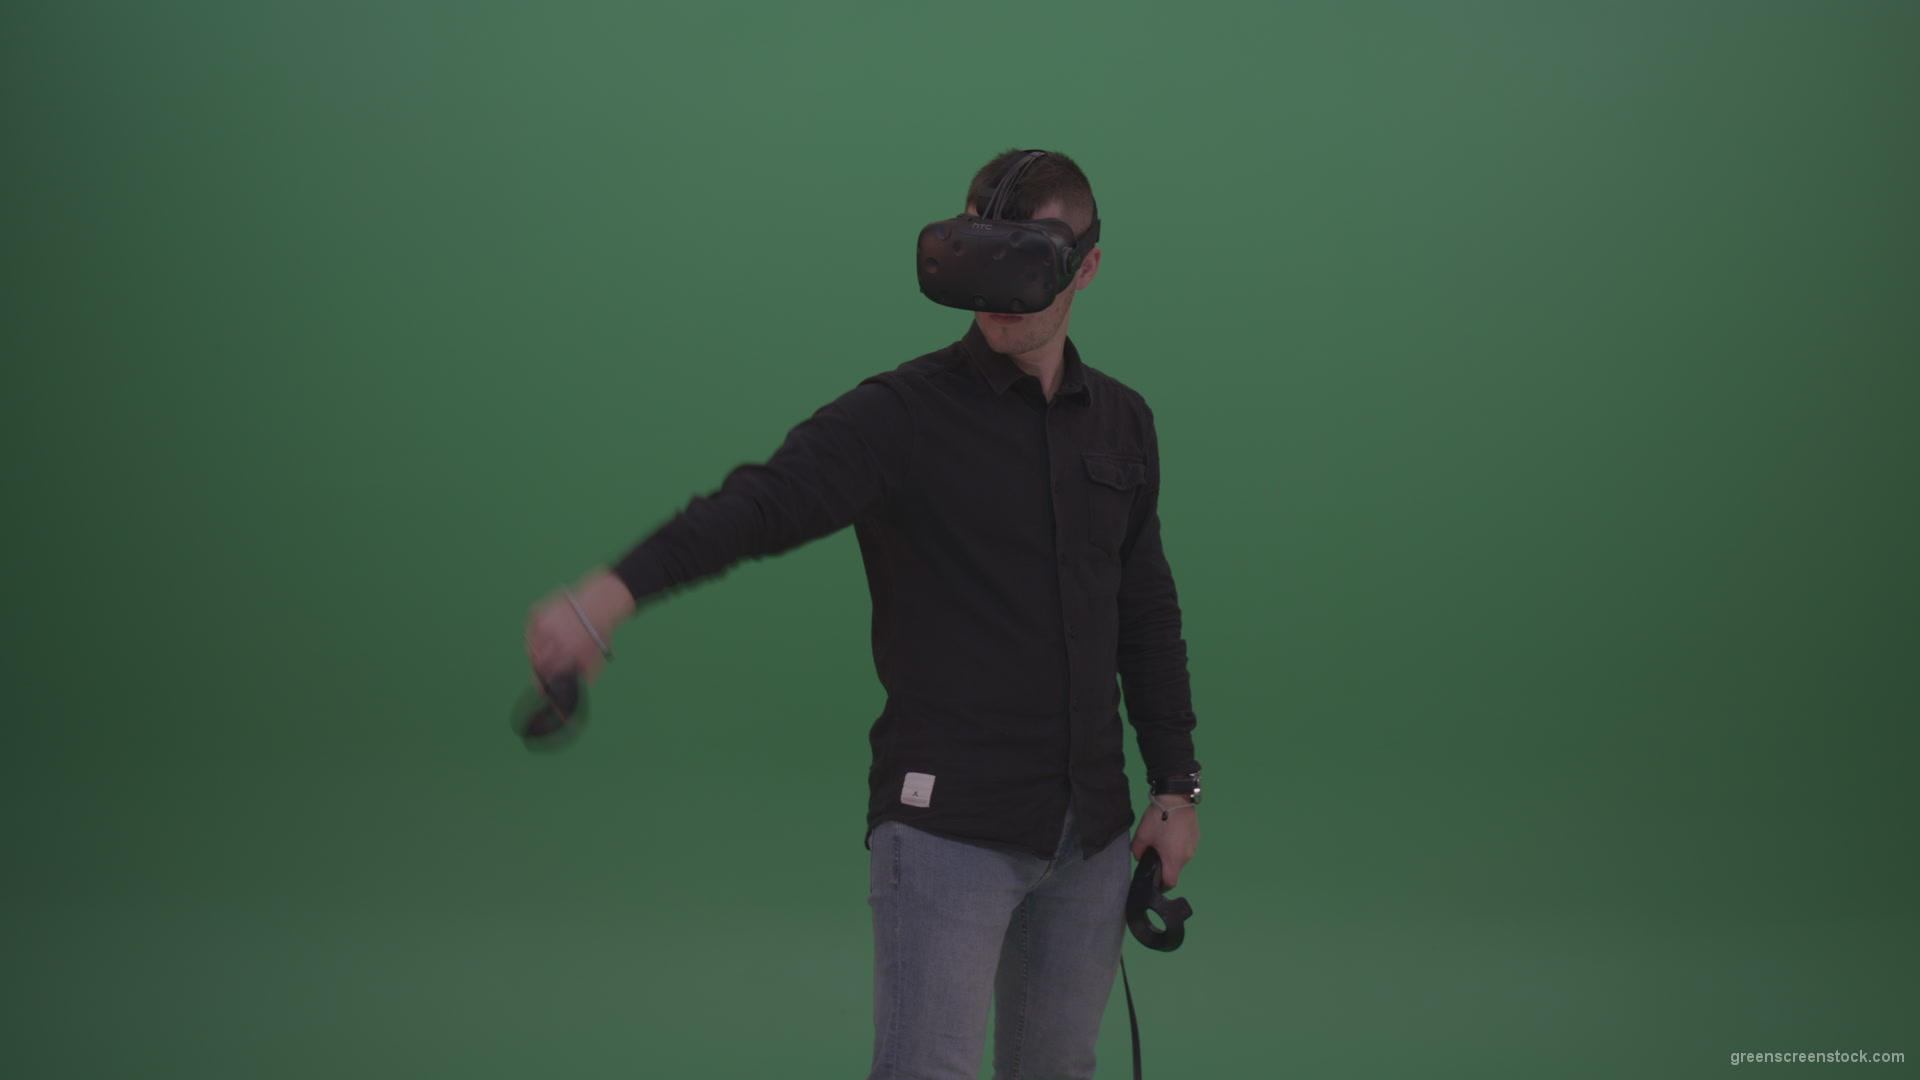 Young_Dangerous_Brunette_Man_Wearing_Black_Shirt_Shooting_Enemies_All_Around_In_Virtual_Reality_Glasses_Green_Screen_Wall_Background_002 Green Screen Stock